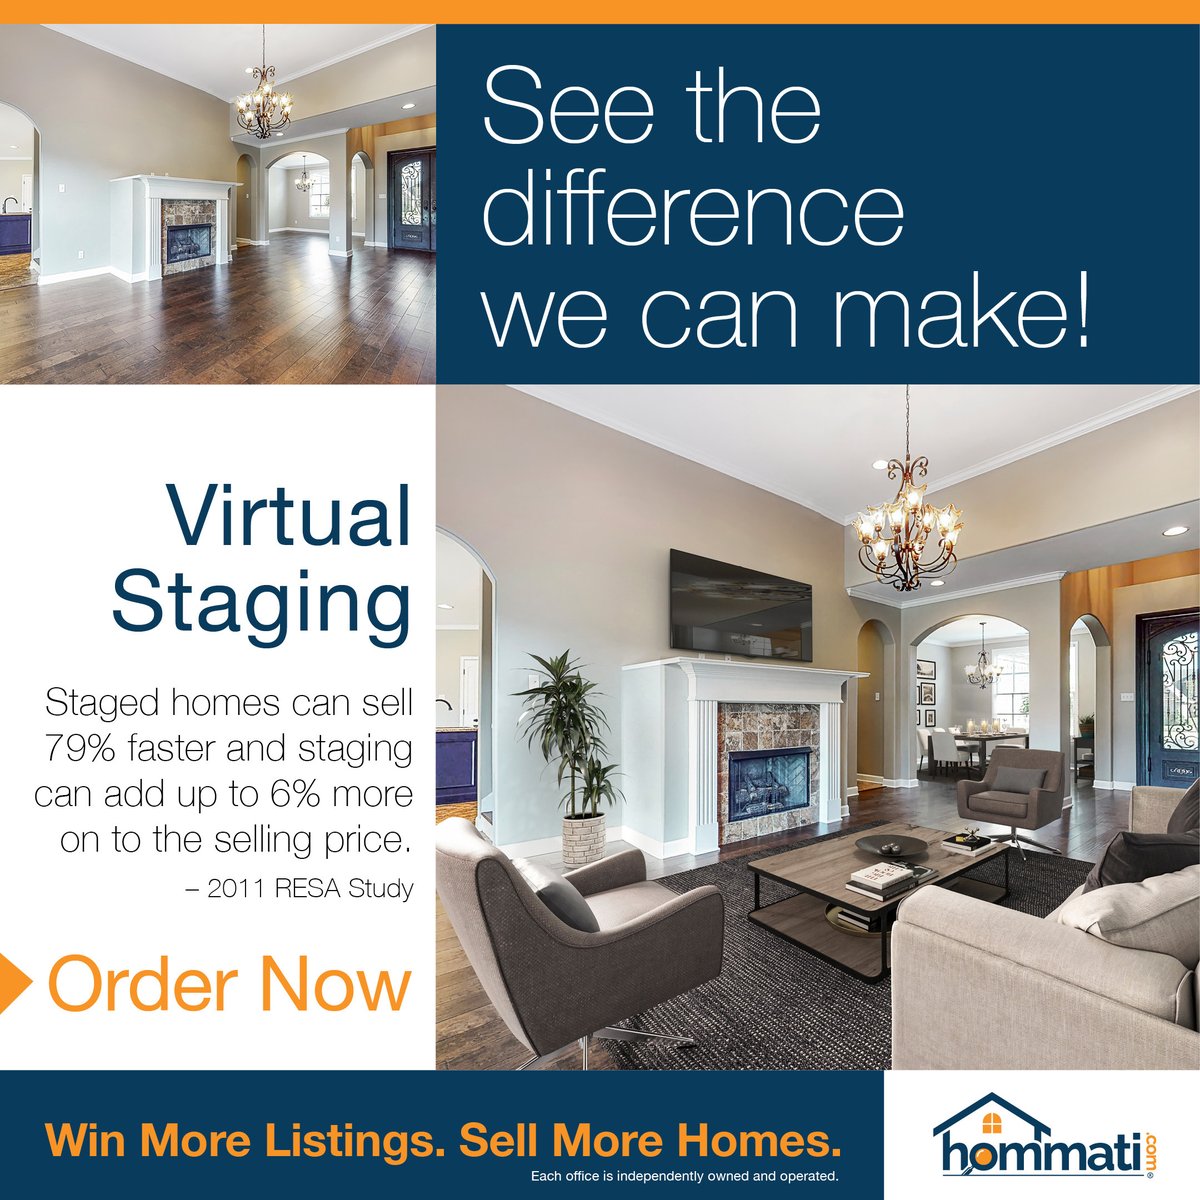 👉👉 Virtual home staging is affordable, effective, and convenient. What more could you ask for? Make your empty listings stand out with Hommati!

💻 hommati.com/office/223

#Hommati #RealEstateService #RealtorMarketing #RealEstateMarketing #ShowcaseListings...